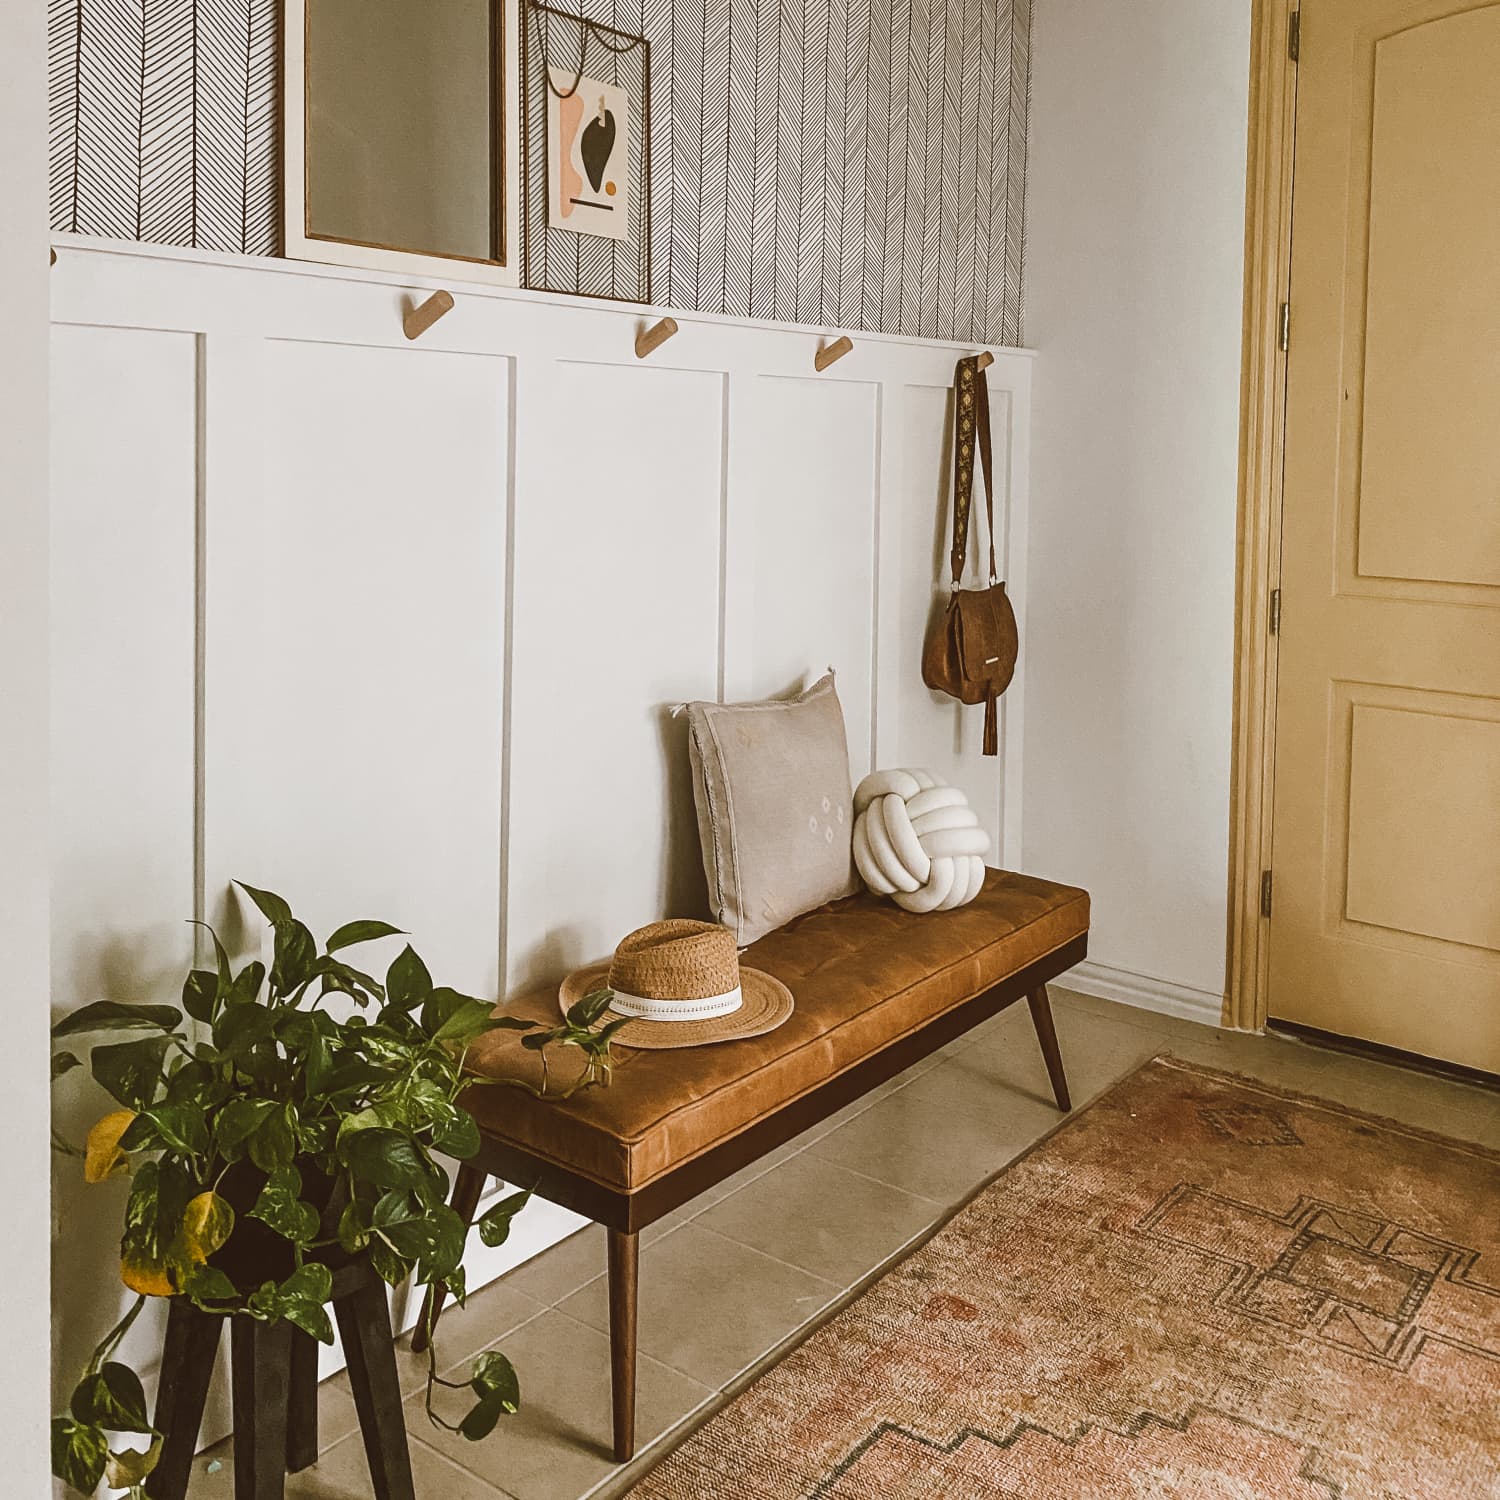 5 Colors You Should Never Paint Your Entryway